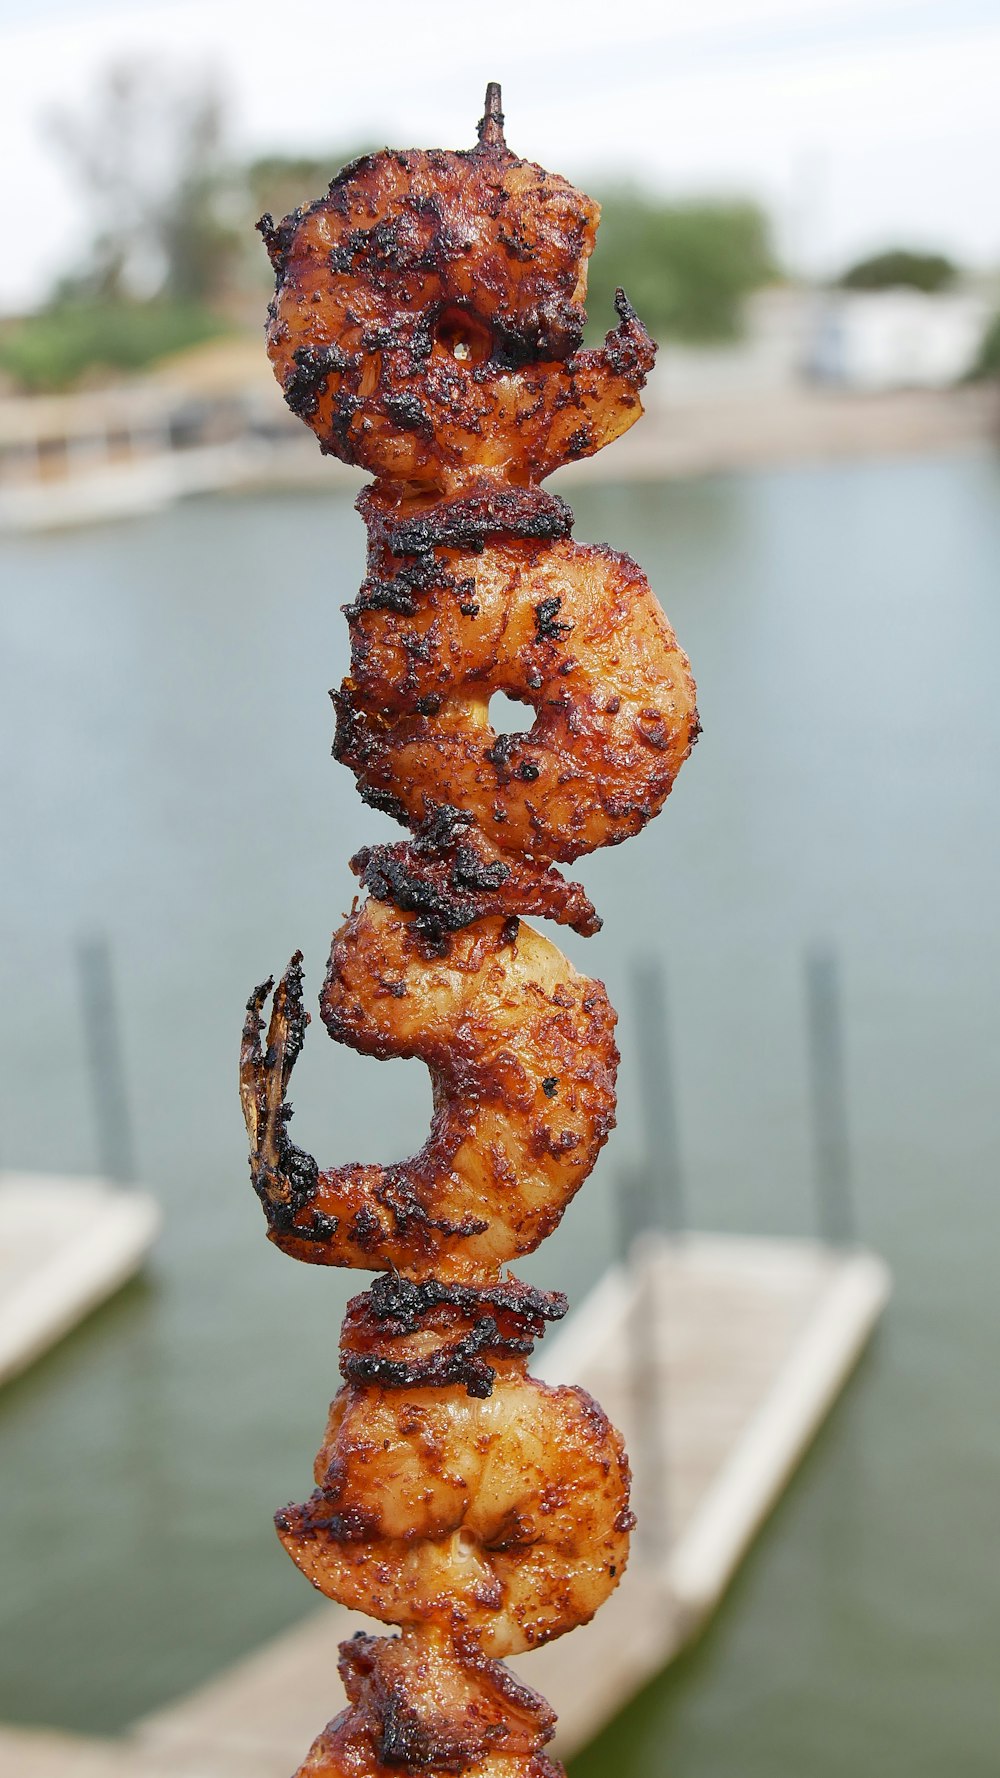 a close up of a skewer of food near a body of water